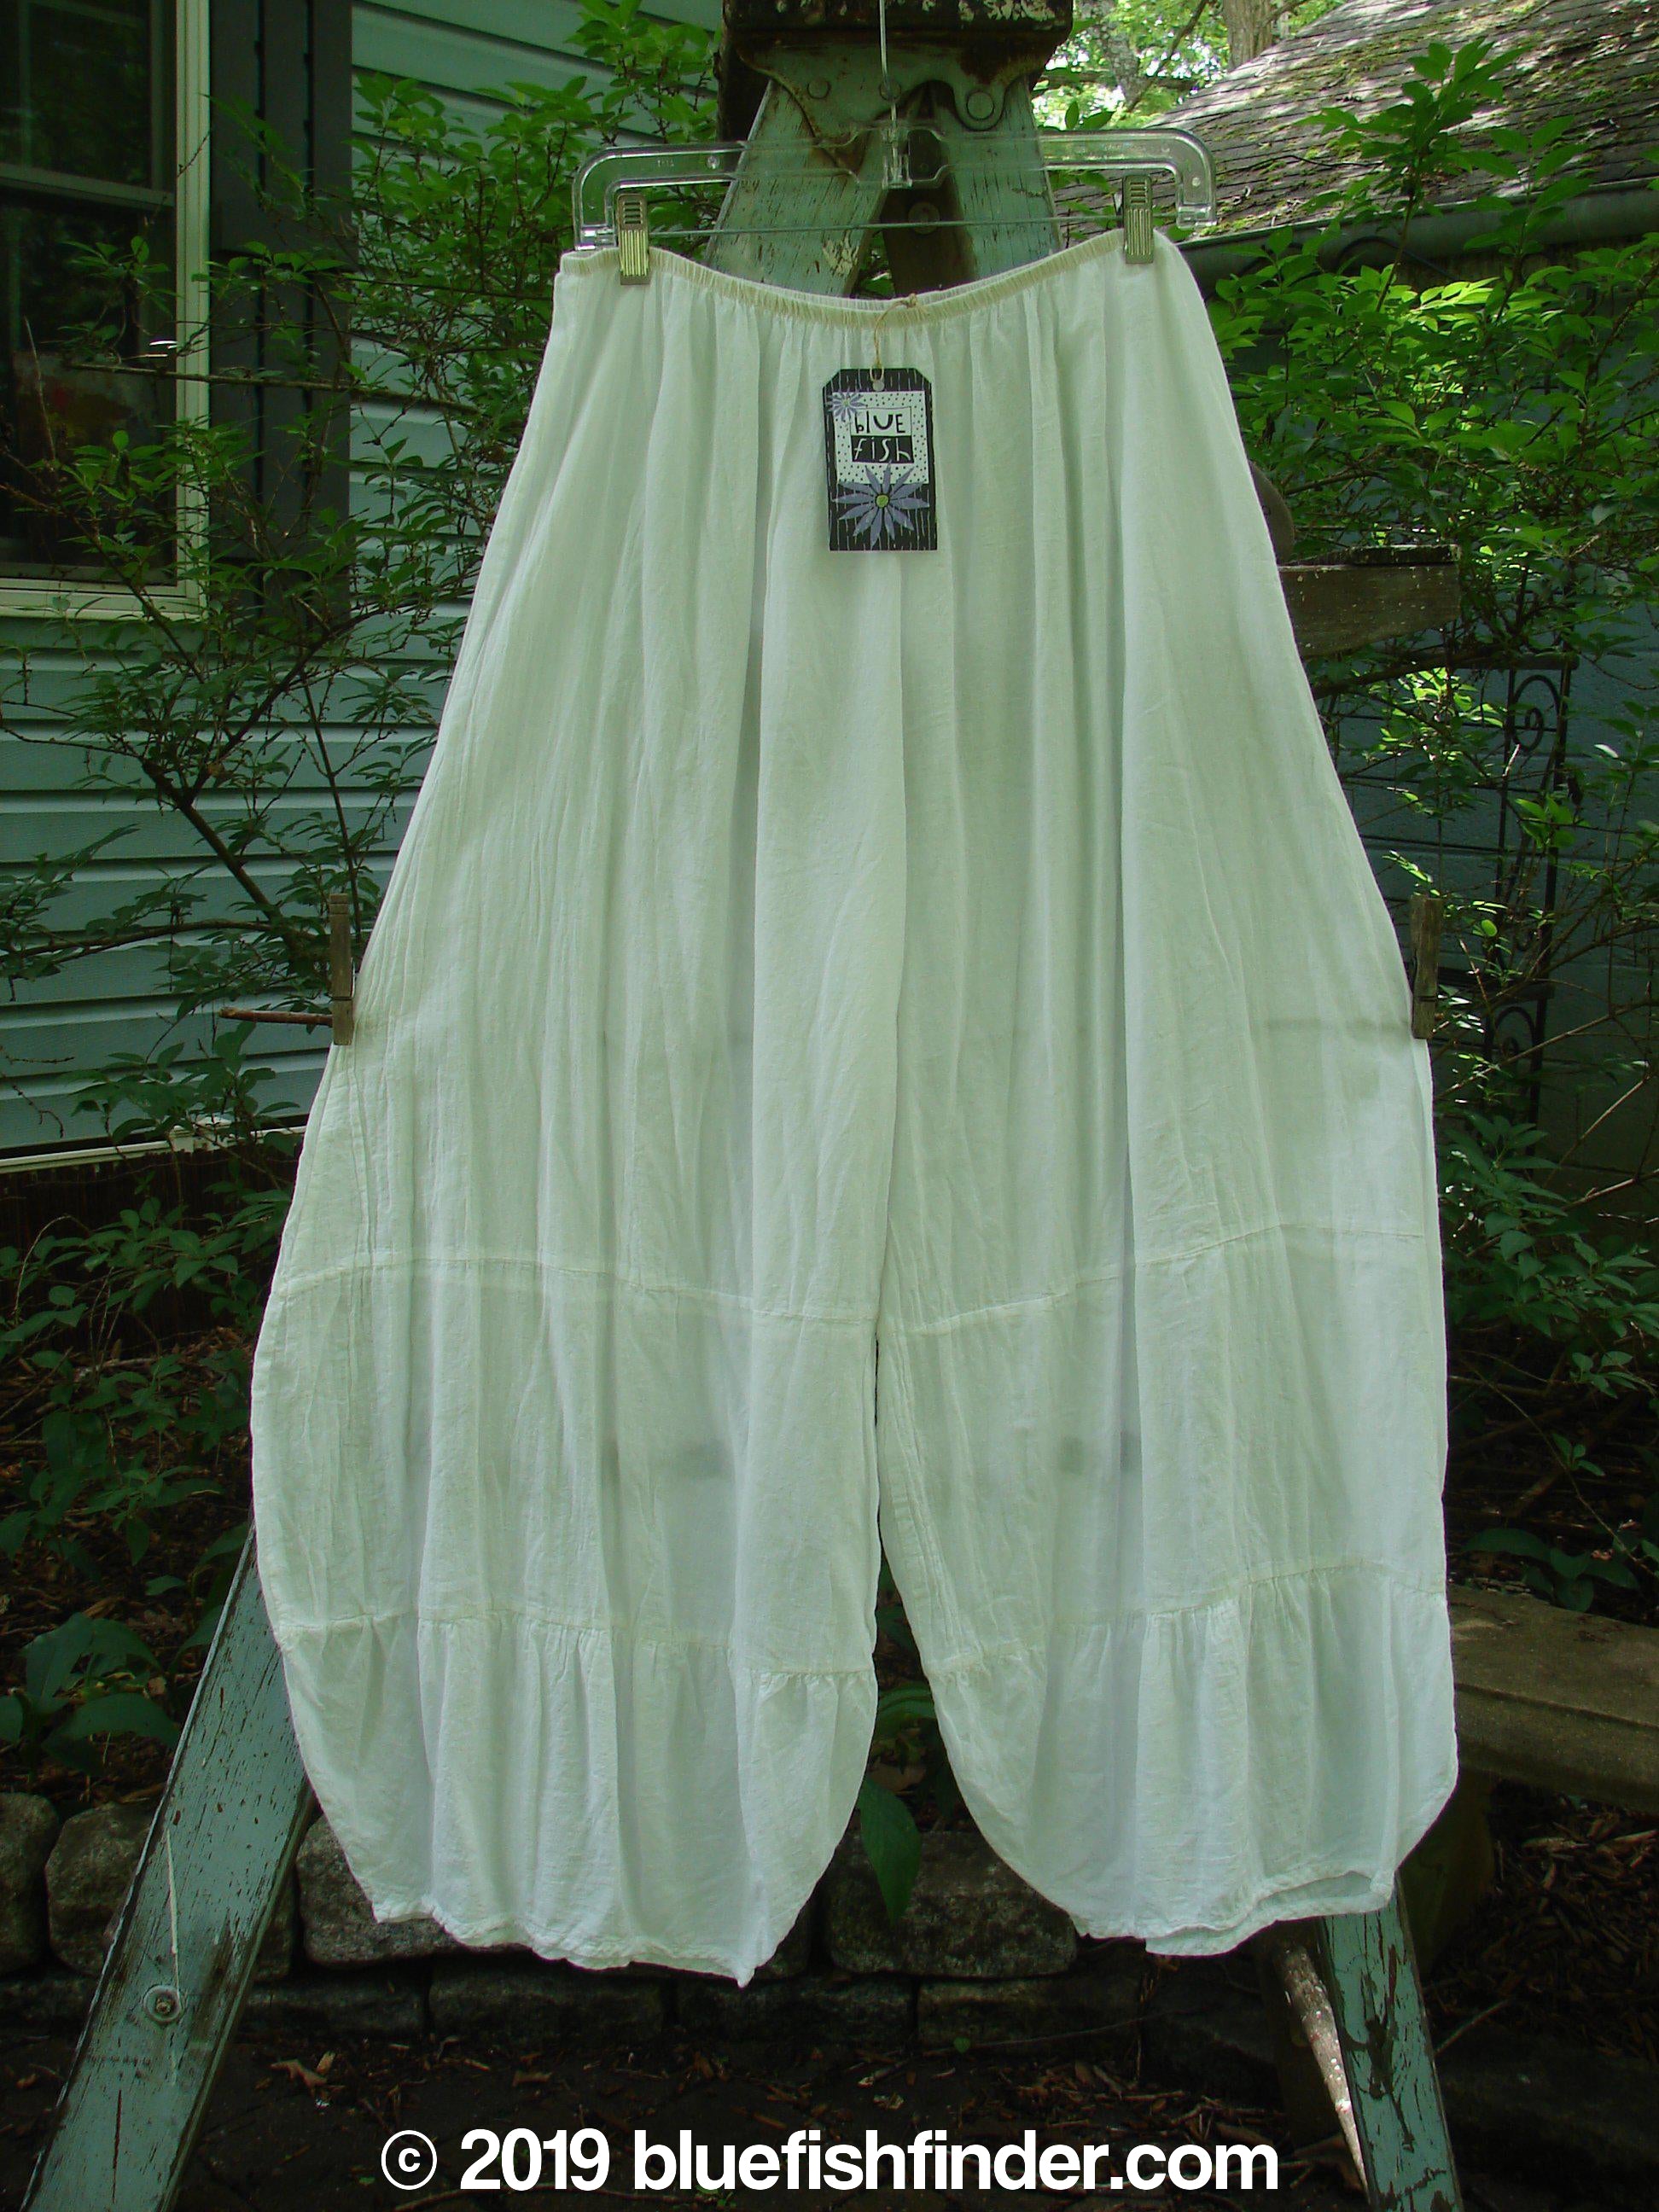 Image alt text: Barclay NWT Batiste Draw Midi Meadow Trio White Size 2 - White pants on a clothesline with a tag and string detail.